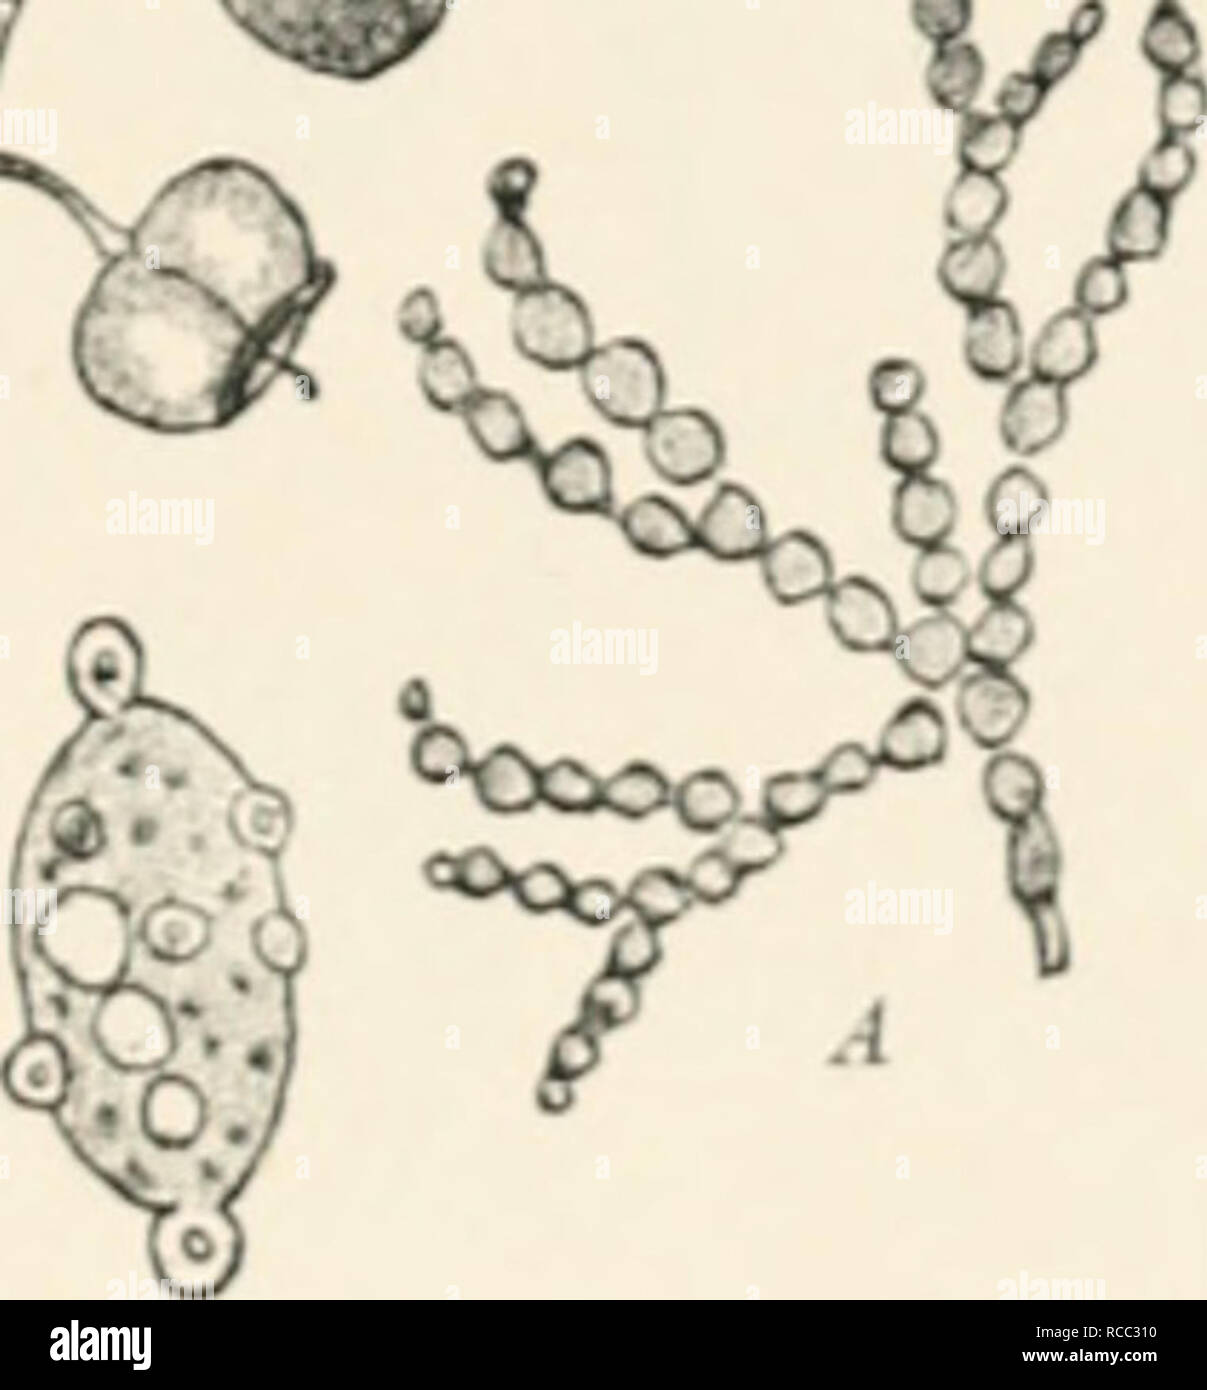 . Diseases of plants induced by cryptogamuc parasites; introduction to the study of pathogenic fungi, slime-fungi, bacteria, and algae. English ed. by William G. Smith. Plant diseases; Parasitic plants. n T&amp;4^^. C D li Fifi. 137.âSclerotinia liaccorum on racciiiium Mi/rtitlus. Young shoot of Bilberrj' with deformed branch bearing white conidi;il jiatches on its lower side ; also ii withered leaf. A, Conidial chains, and a portion enlarged. Ji, Shoot with an iipjjer healthy ripe berry and a lower munimified one. C, Peziza-cup develoi)ed from a Bclerotium. I&gt;, .Ascosiwres ; the smaller i Stock Photo